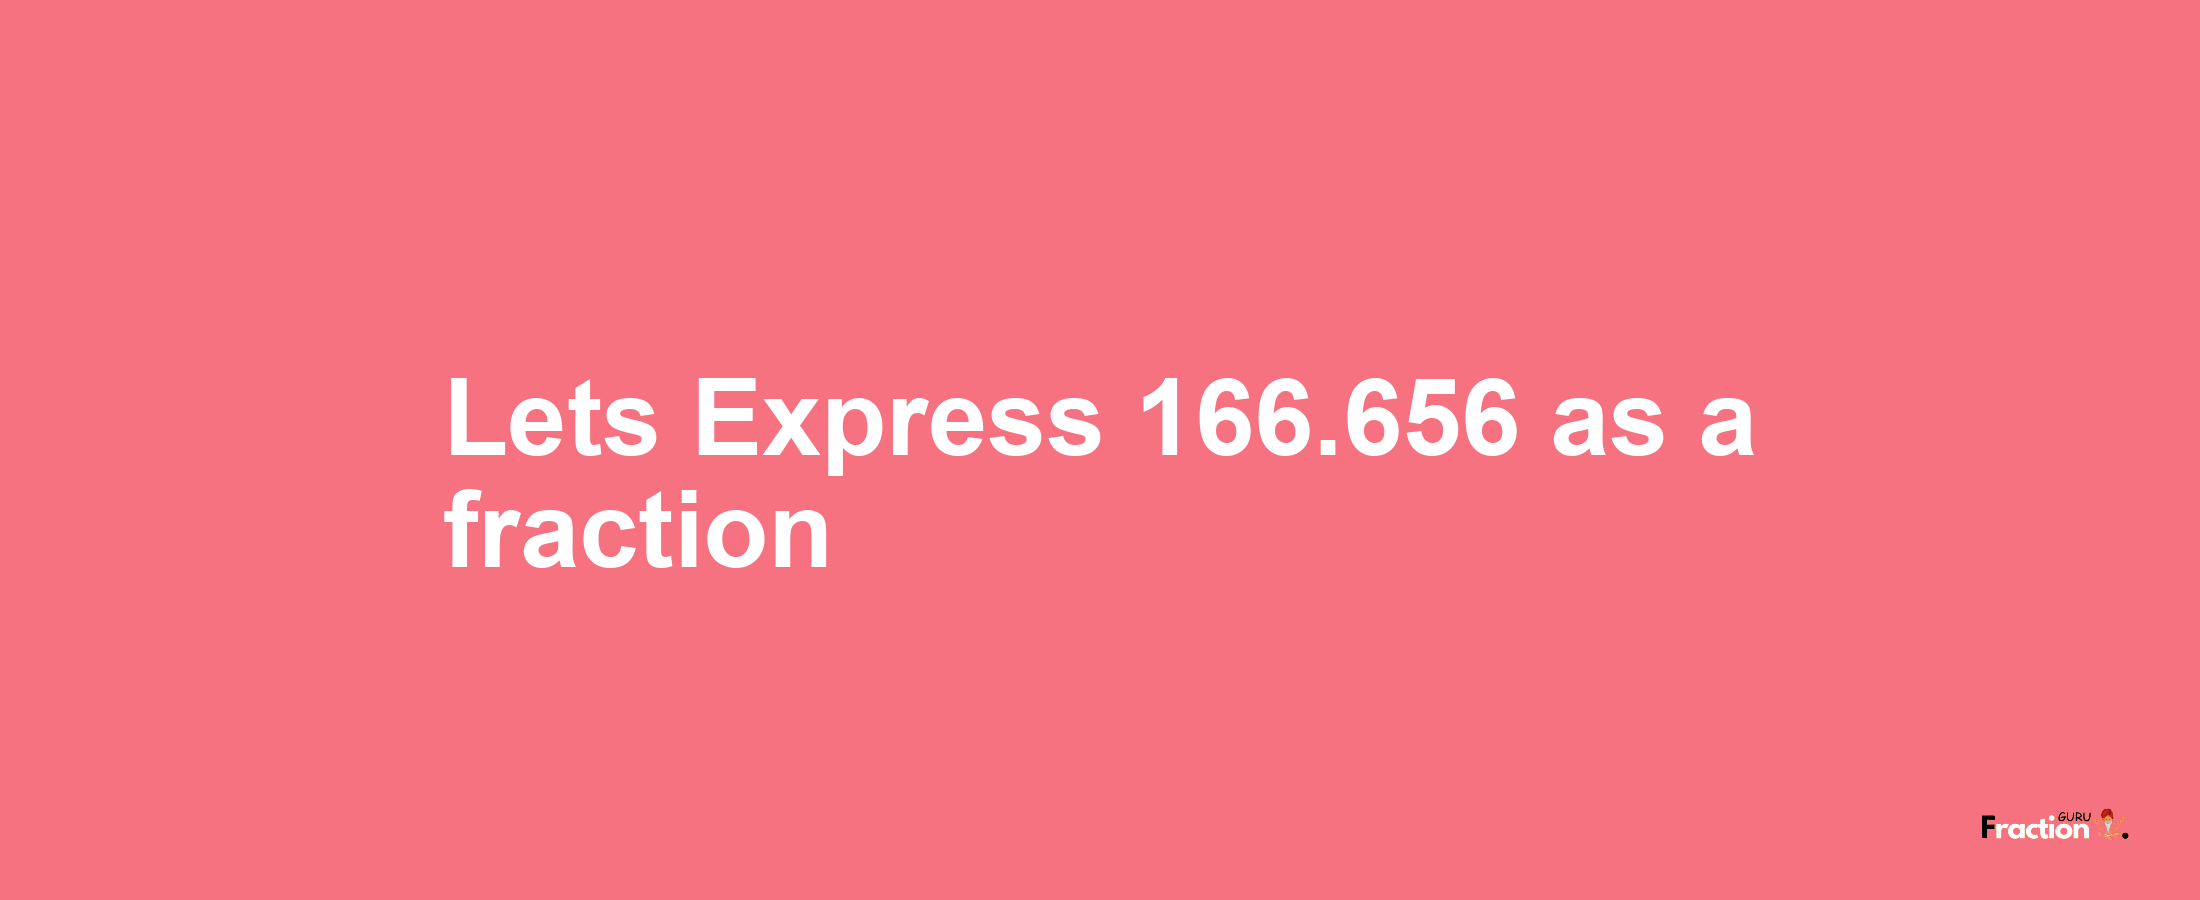 Lets Express 166.656 as afraction